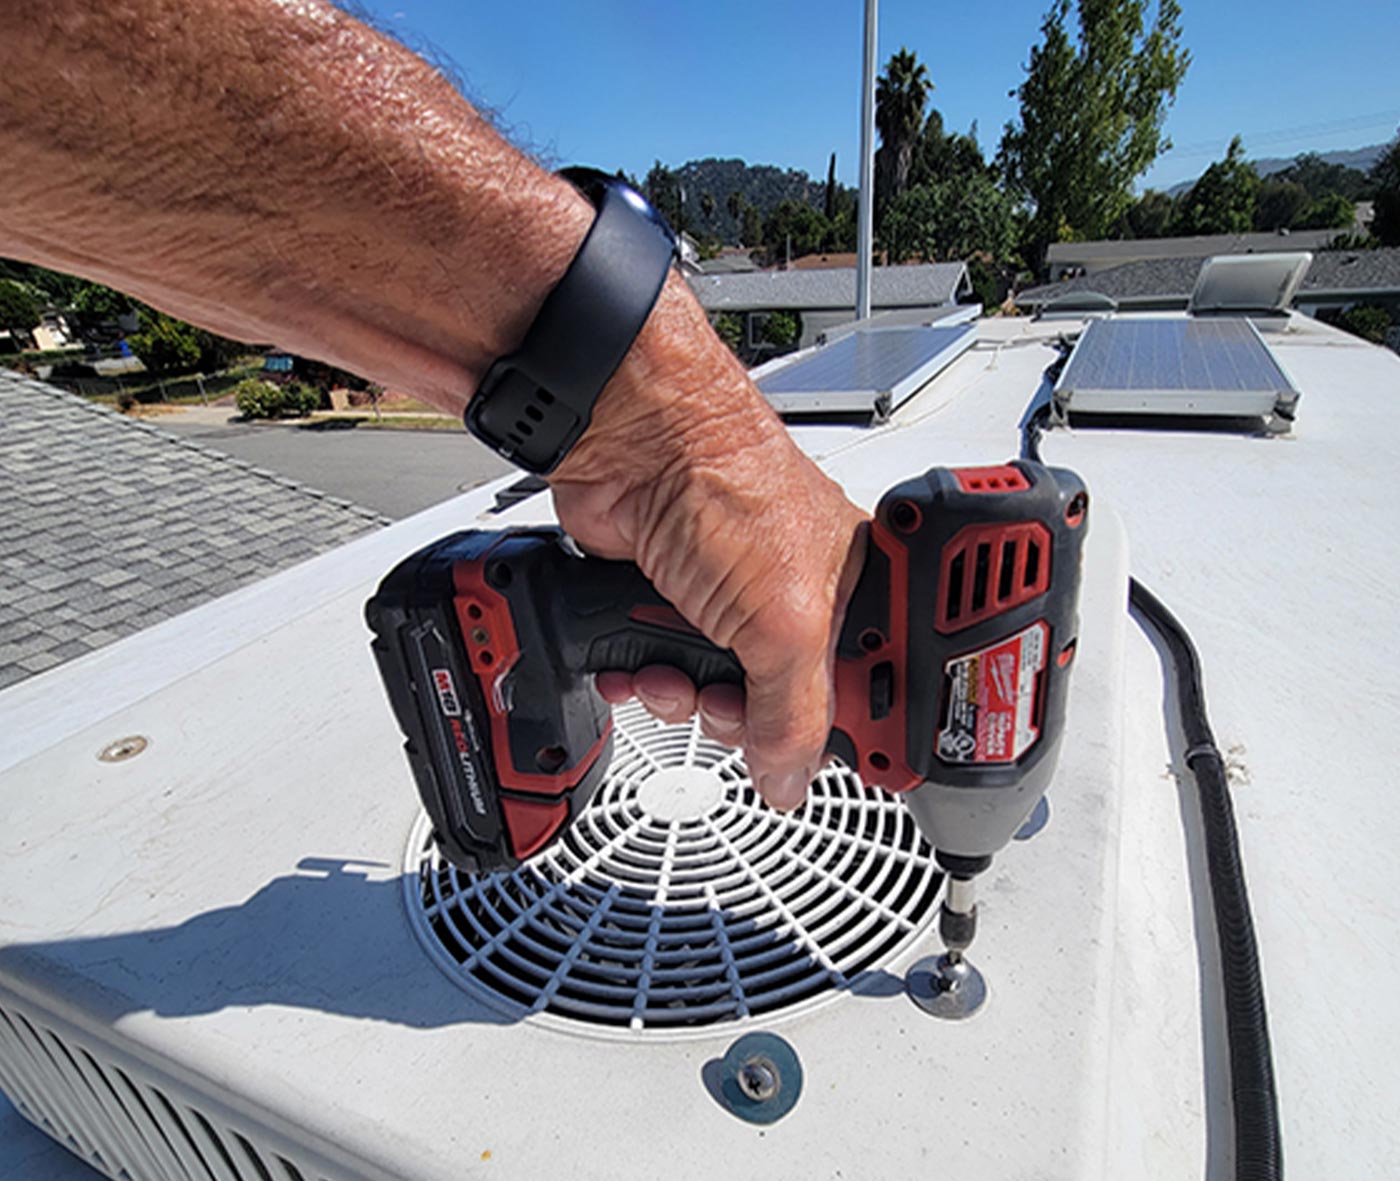 four bolts are removed from the top of the air-conditioner shroud using a drill gun